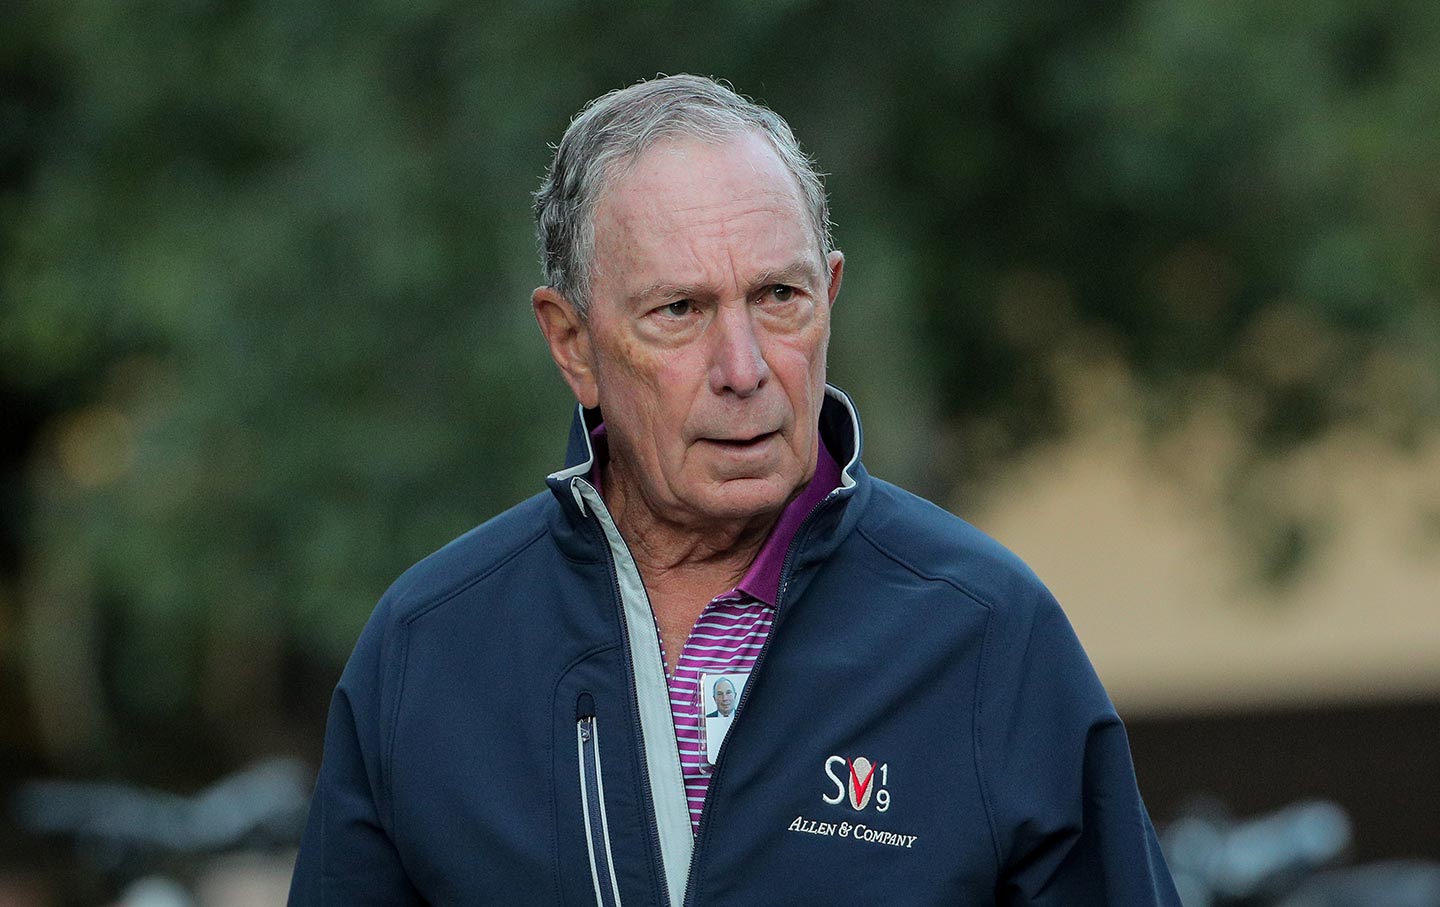 Michael Bloomberg Should Stay Home—and Pay His Taxes